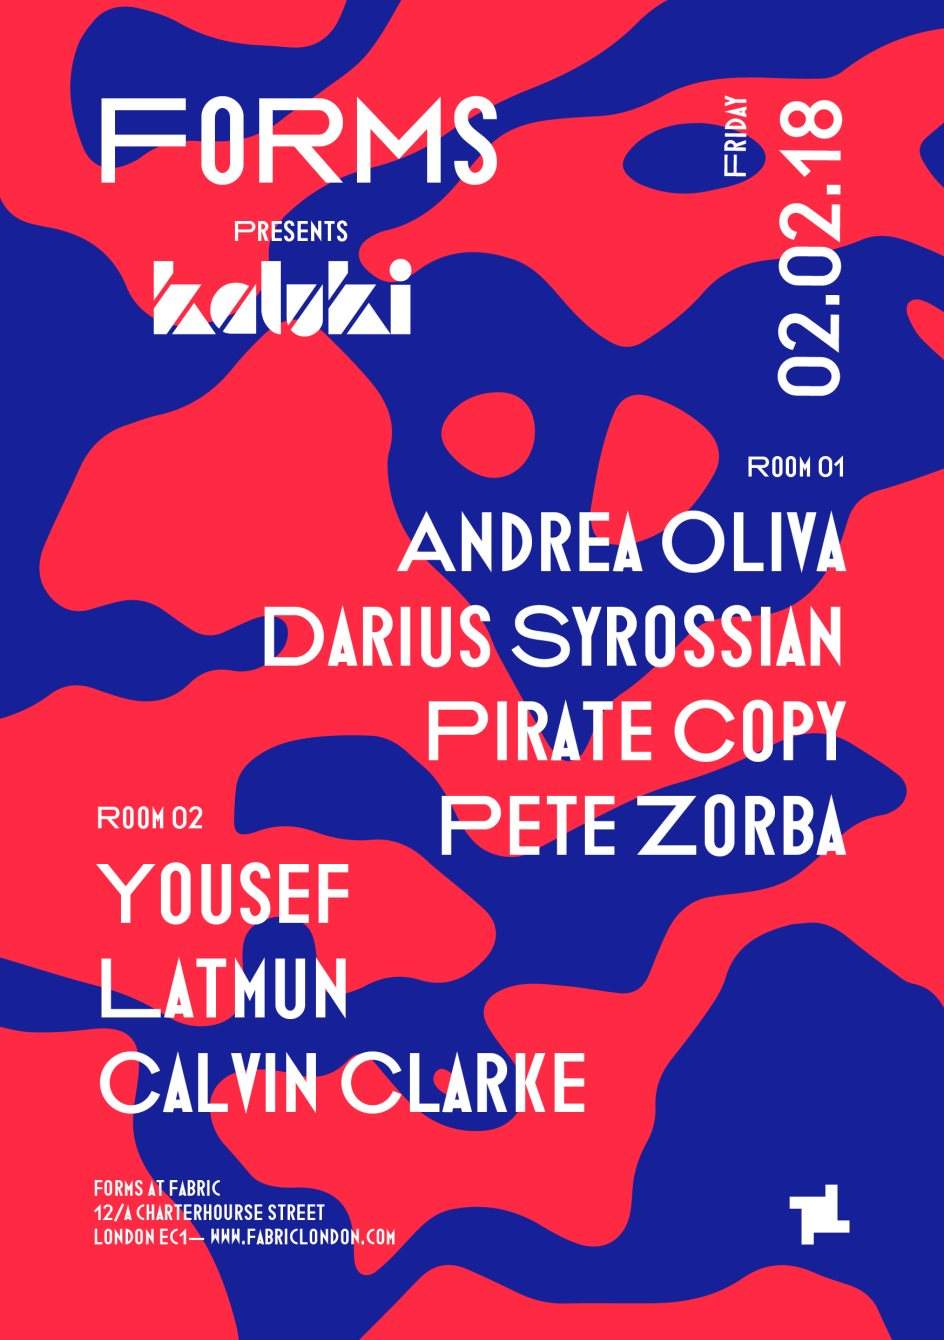 Forms presents Kaluki with Andrea Oliva, Darius Syrossian, Yousef, Latmun & More - フライヤー裏